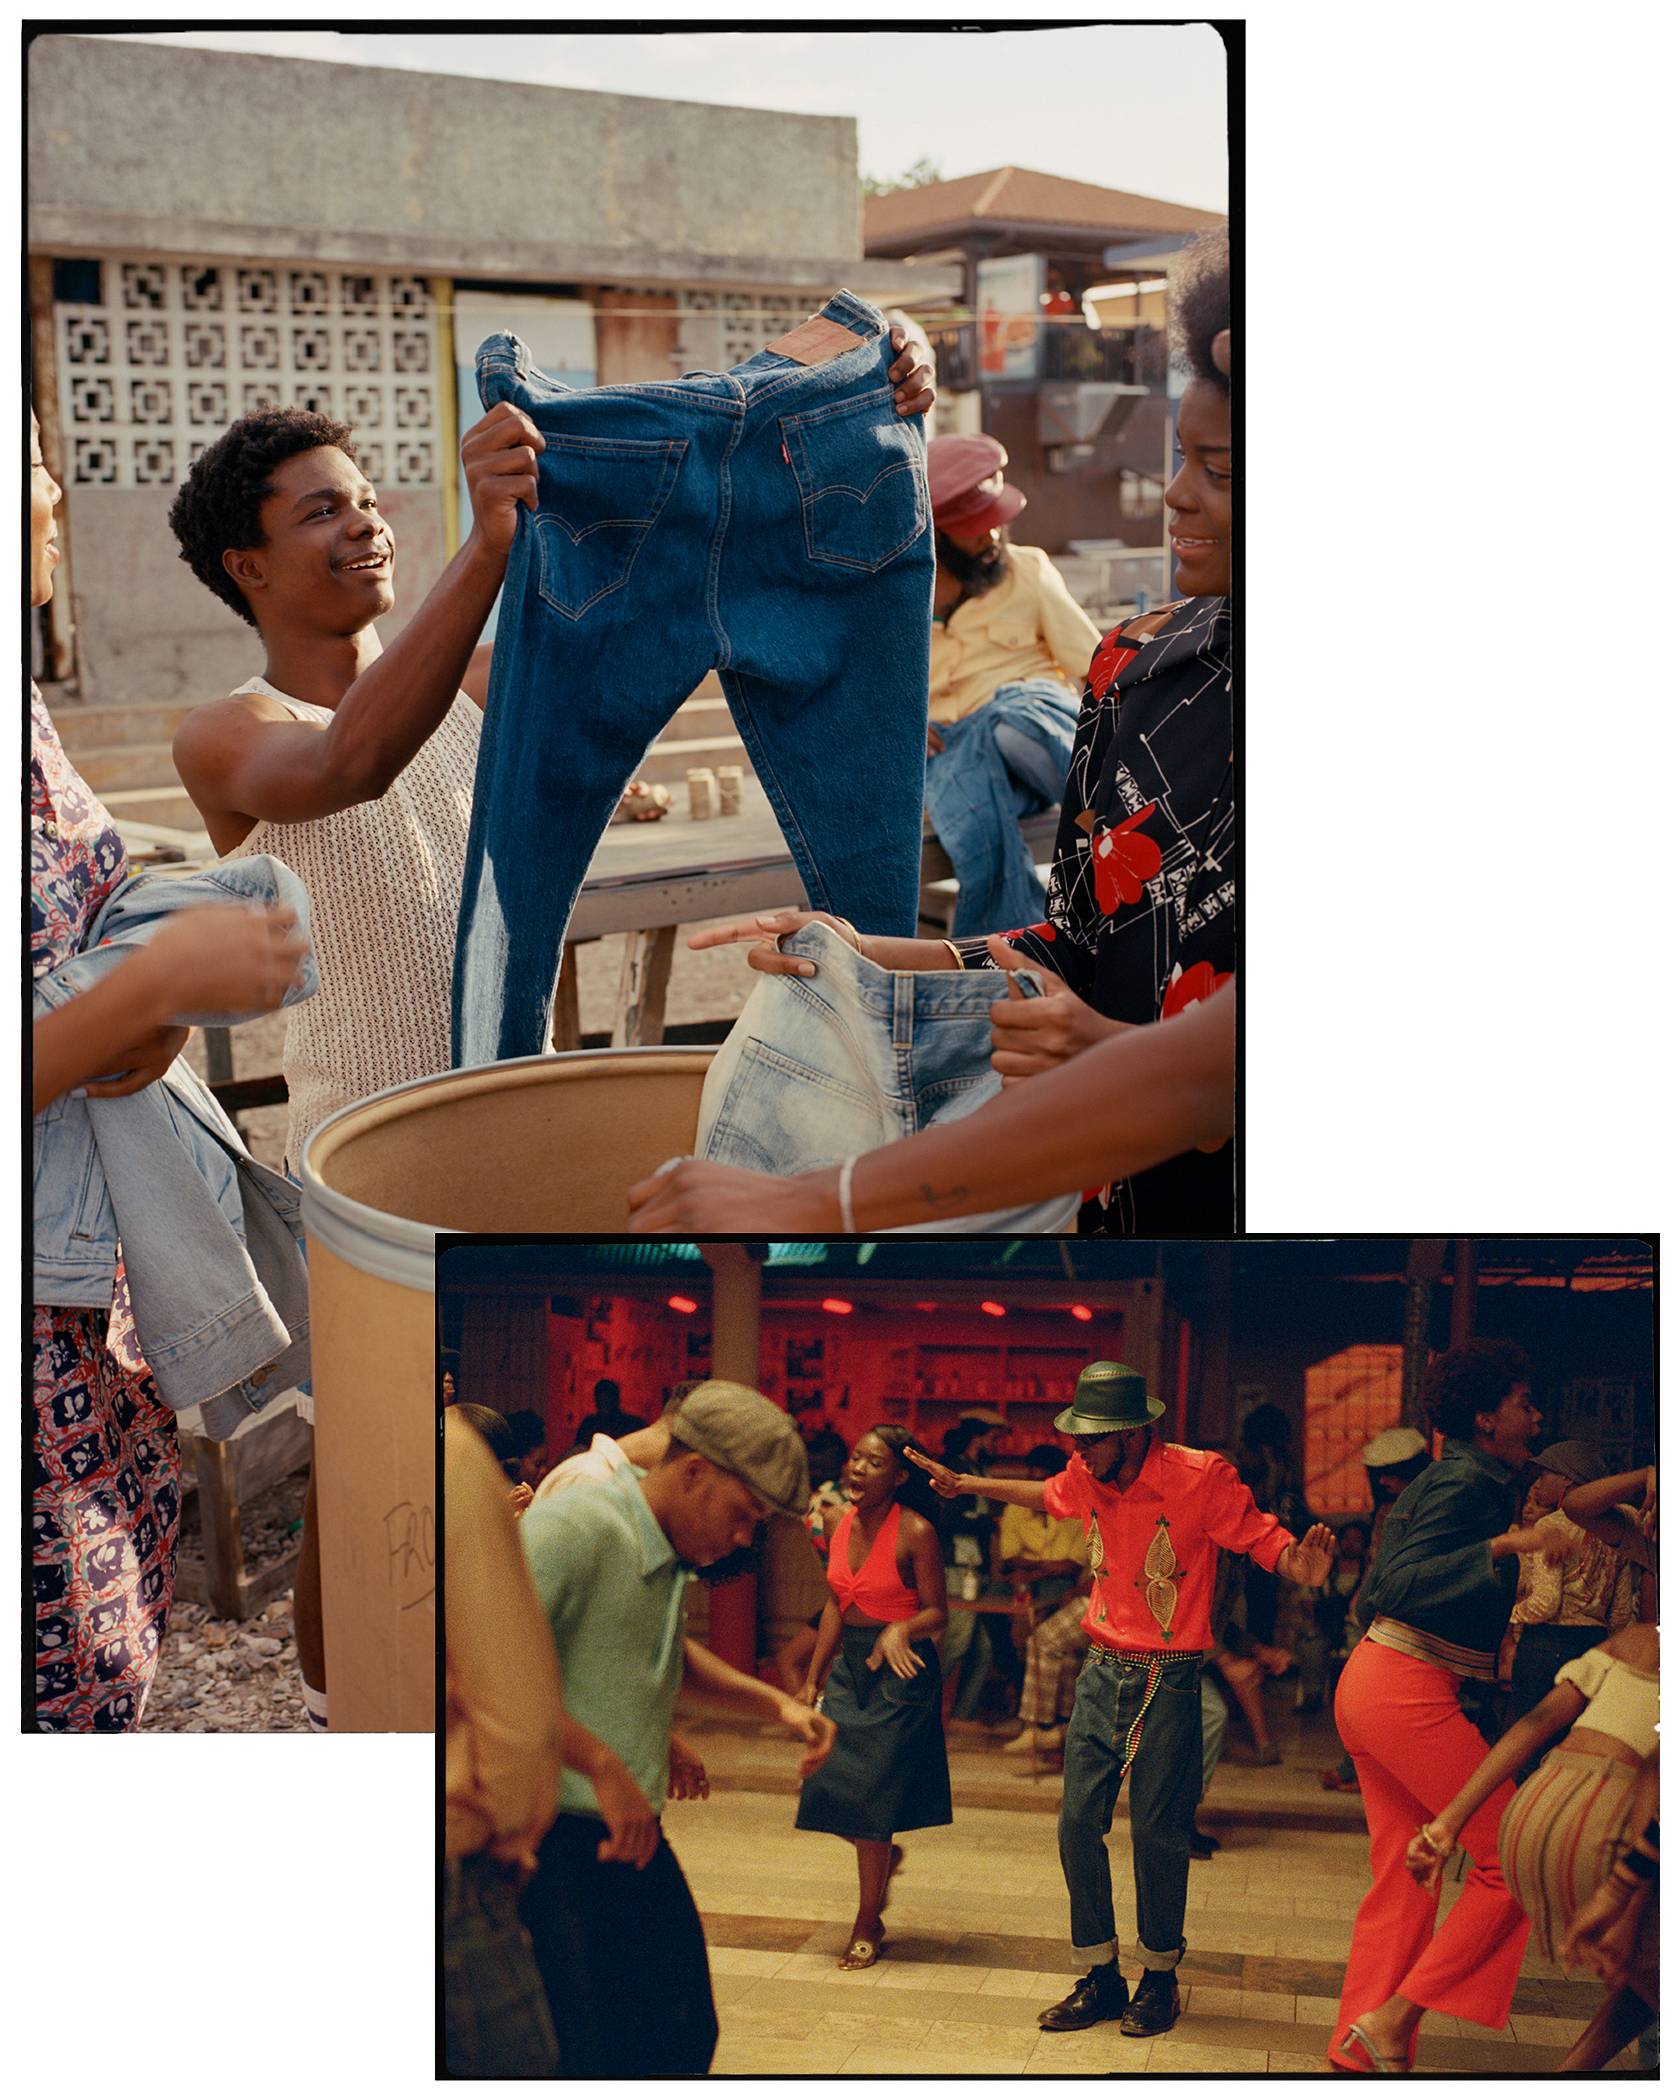 Collage of one image with people dancing in Levi's and another image of people holding jeans.